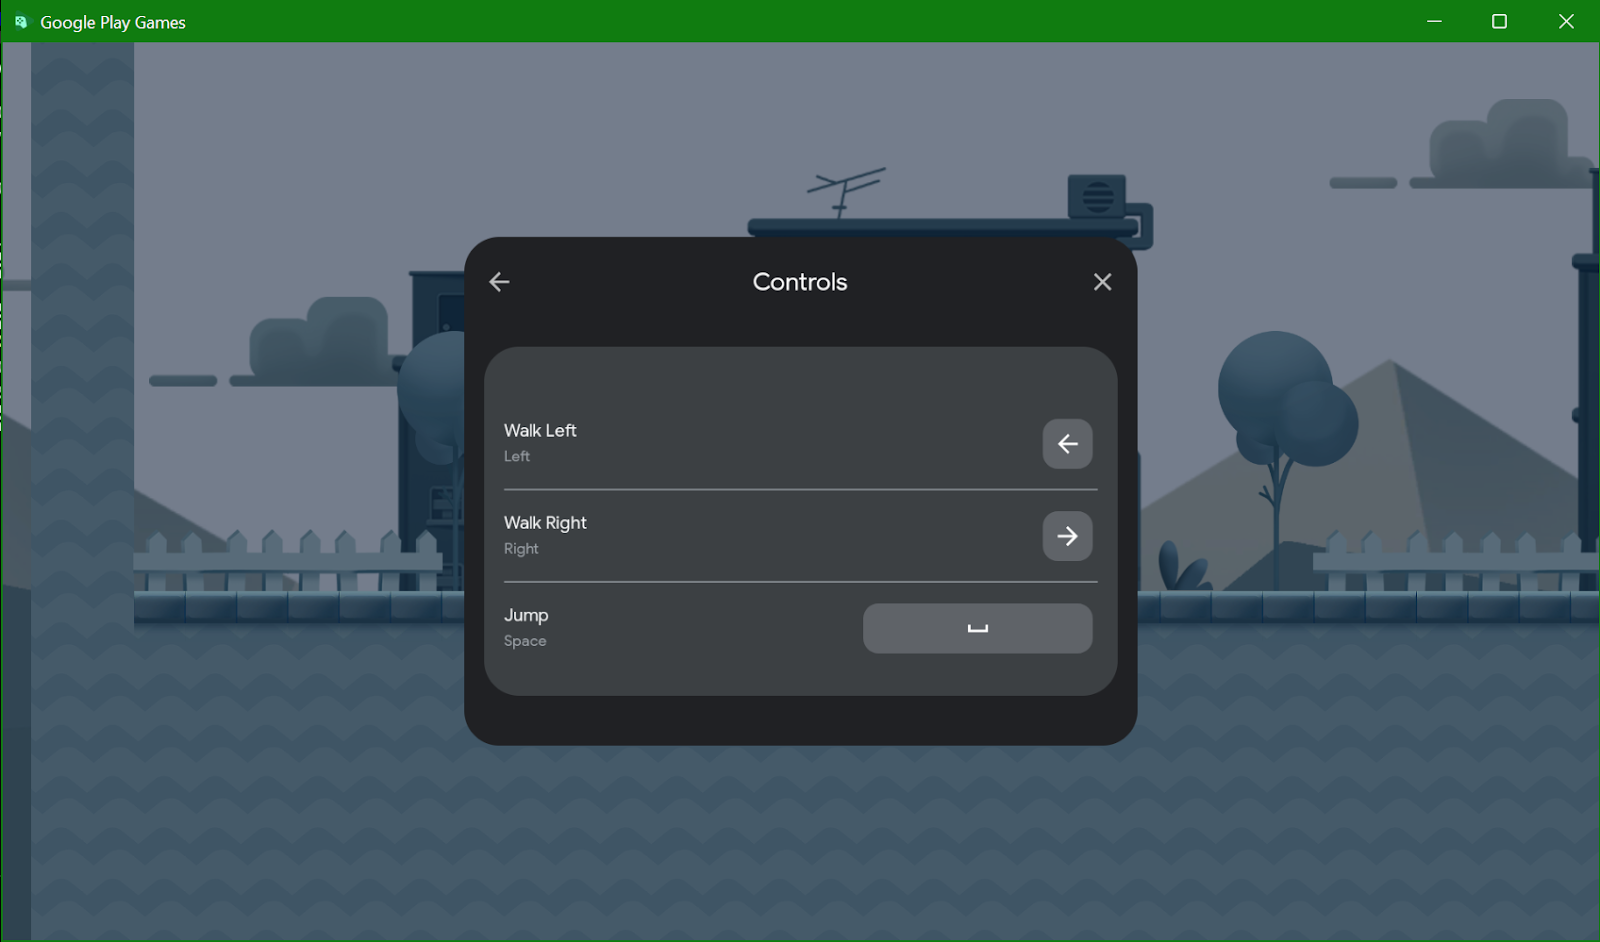 Screenshot of the "Controls" overlay in the Google Play Games emulator